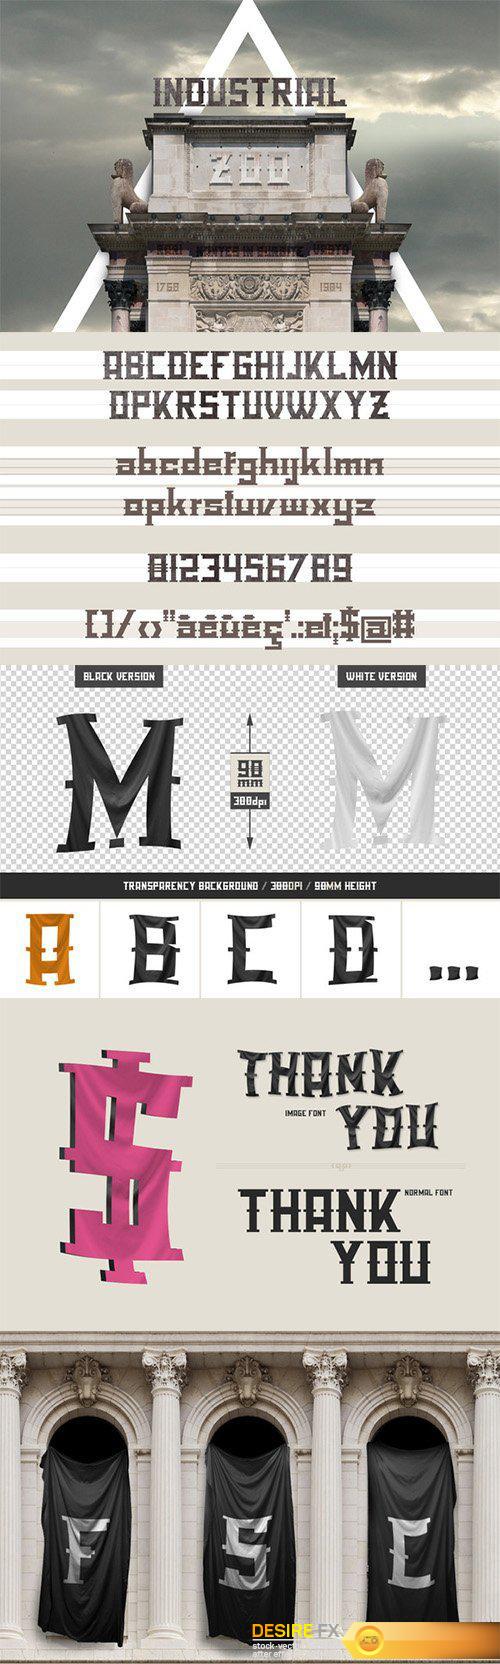 Industrial Zoo - font pack - CM 2752